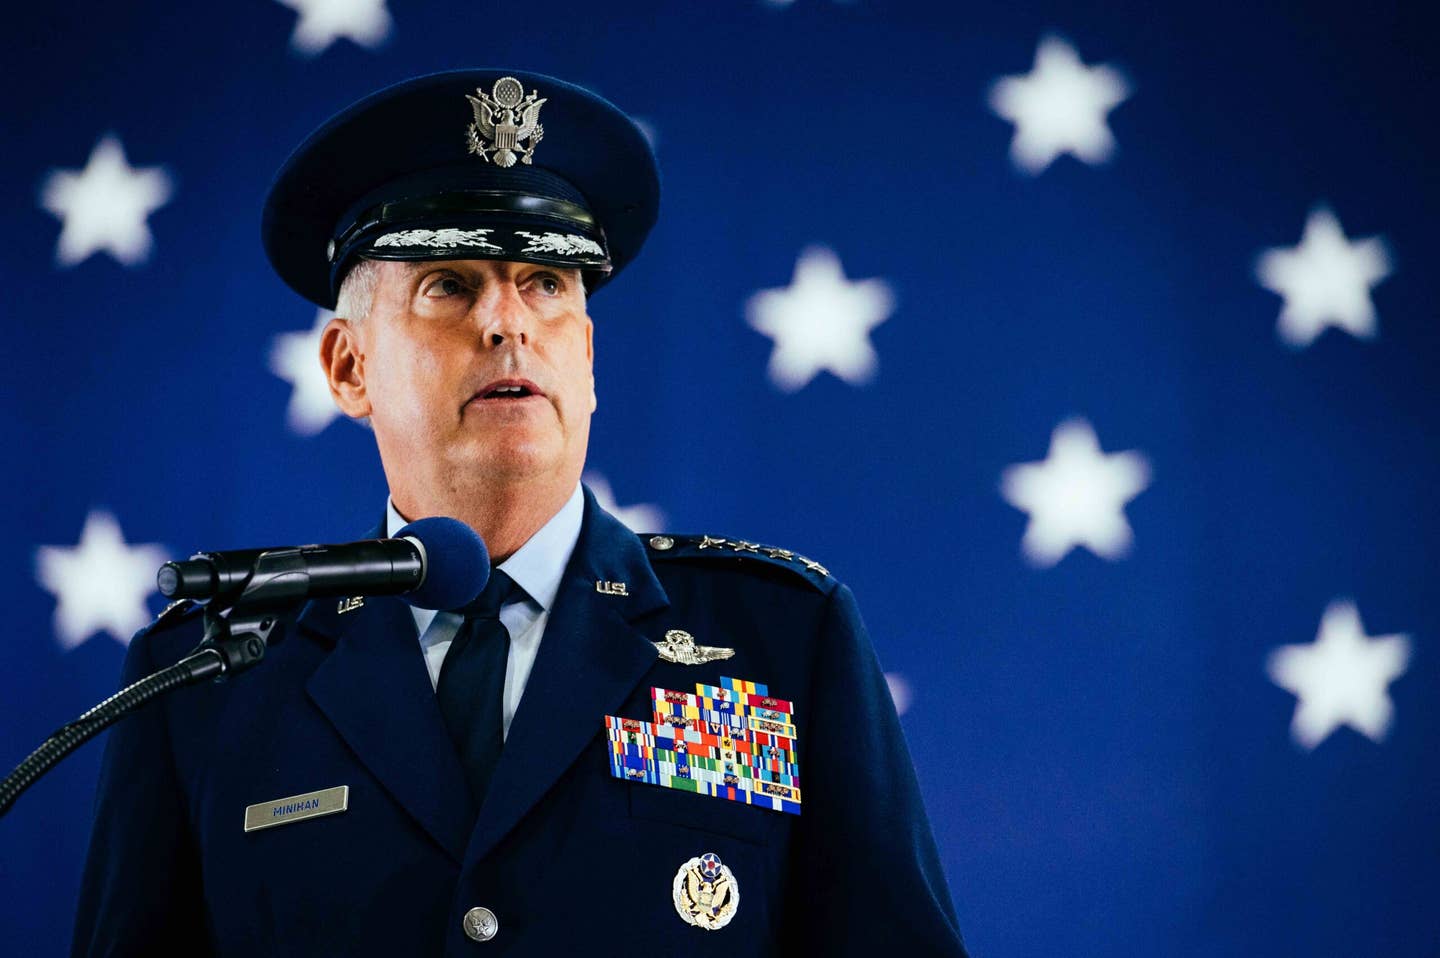 U.S. Air Force Gen. Mike Minihan, incoming Air Mobility Command commander, gives a speech at Scott Air Force Base, Illinois, Oct. 5, 2021. Minihan, succeeded Gen. Jacqueline D. Van Ovost. <em>U.S. Air Force Photo by Airman 1st Class Isaac Olivera</em>